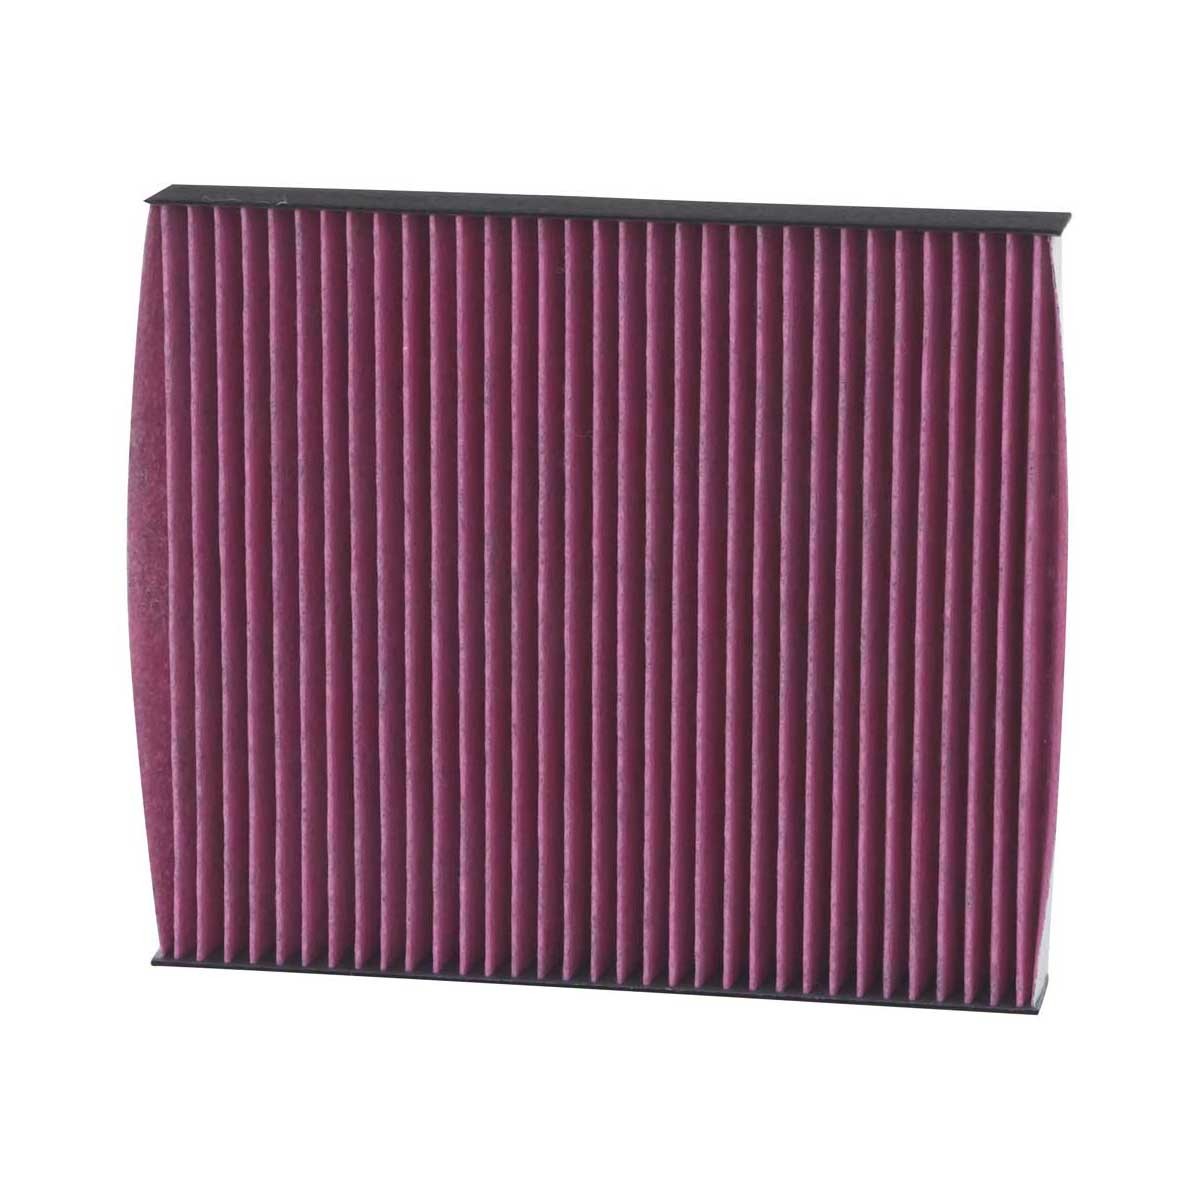 Original K&N Filters Cabin air filter DVF5002 for VW POLO